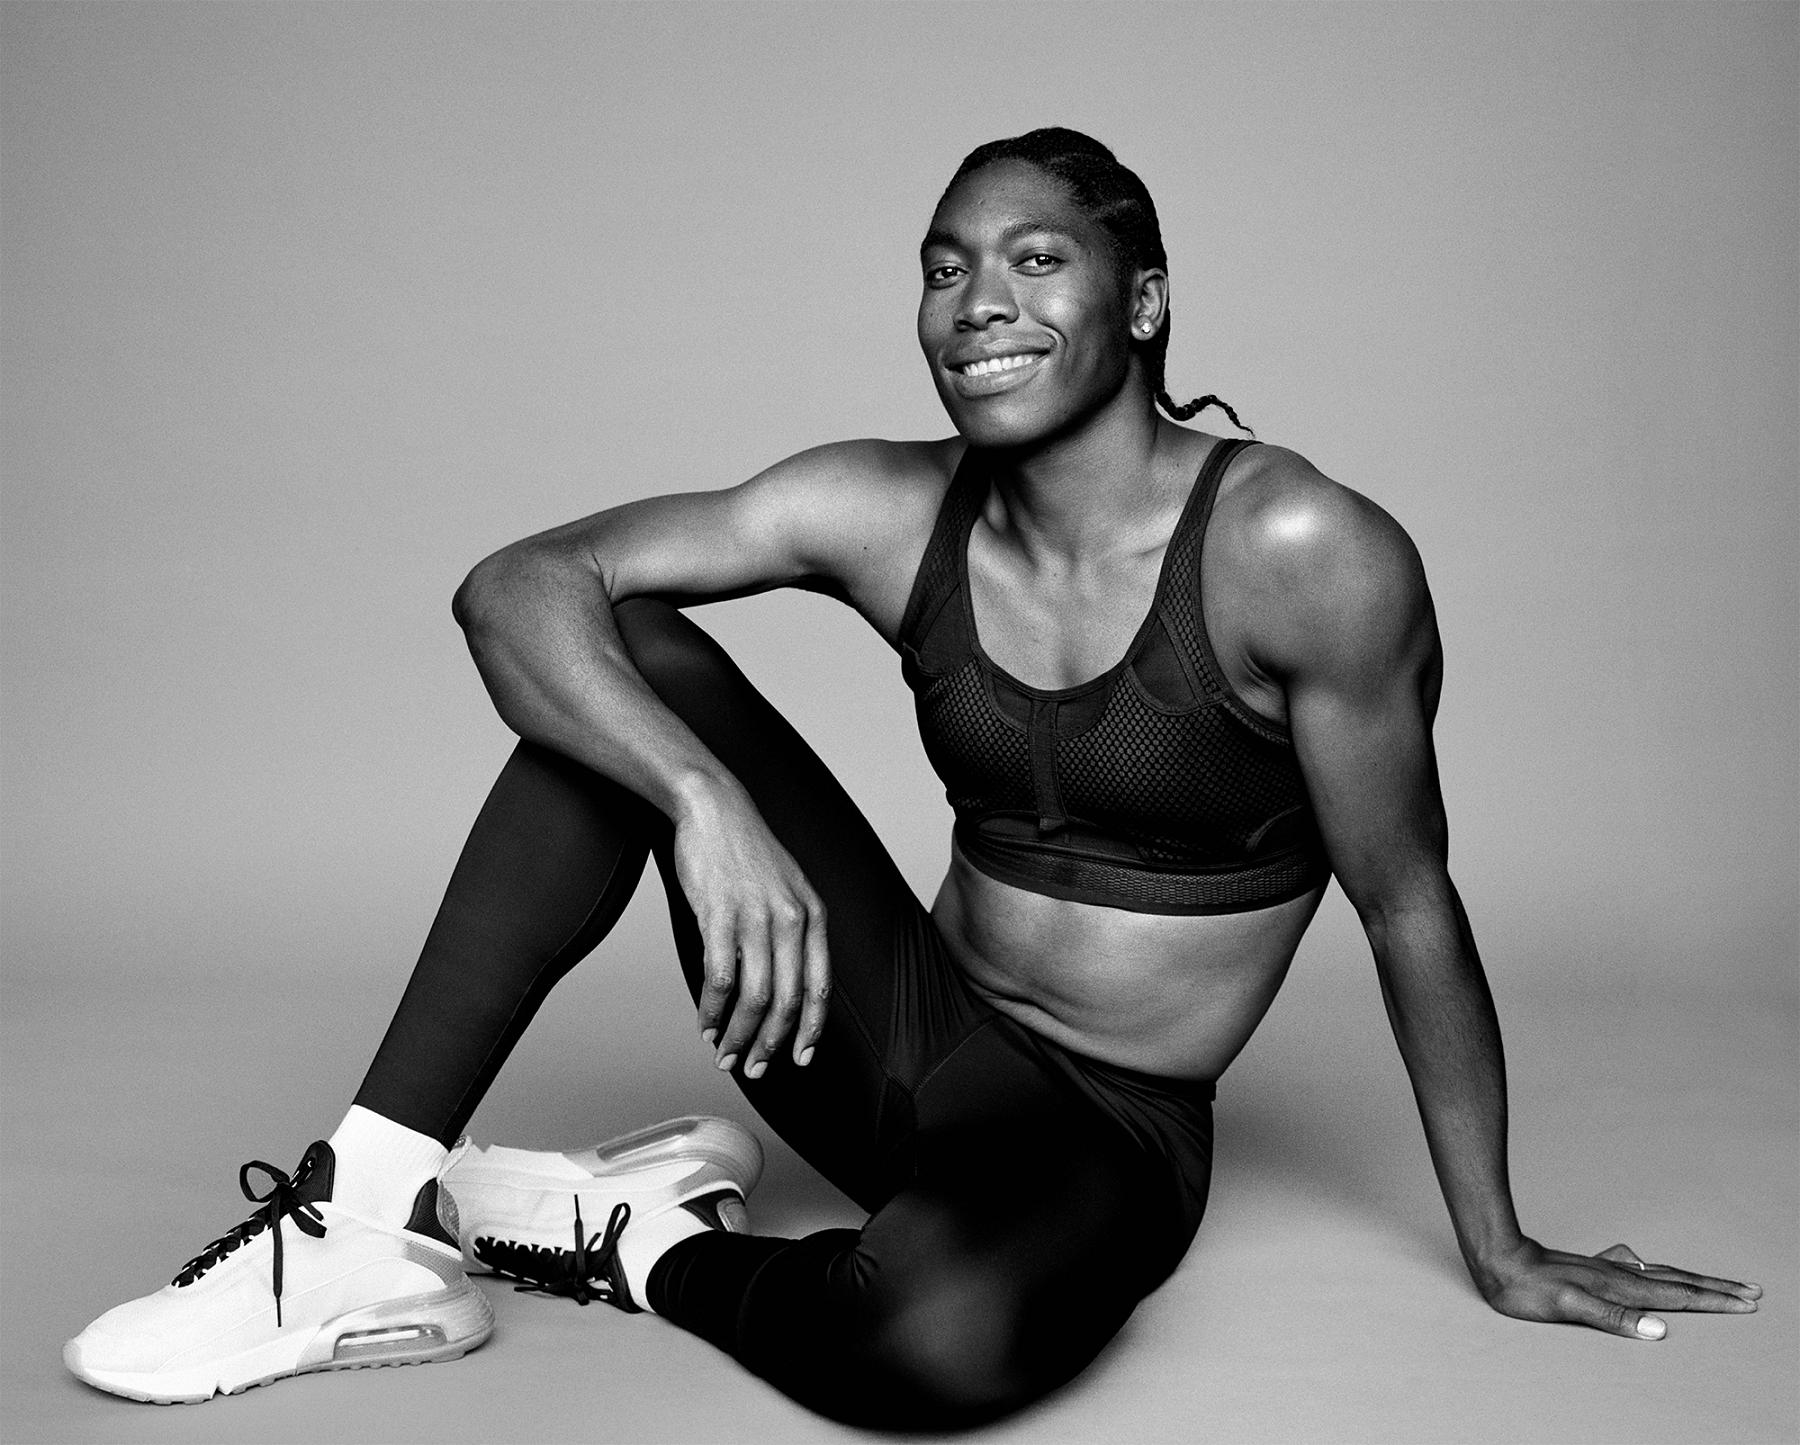 It's Sexist to Insist That Athletes Cover Their Sports Bras